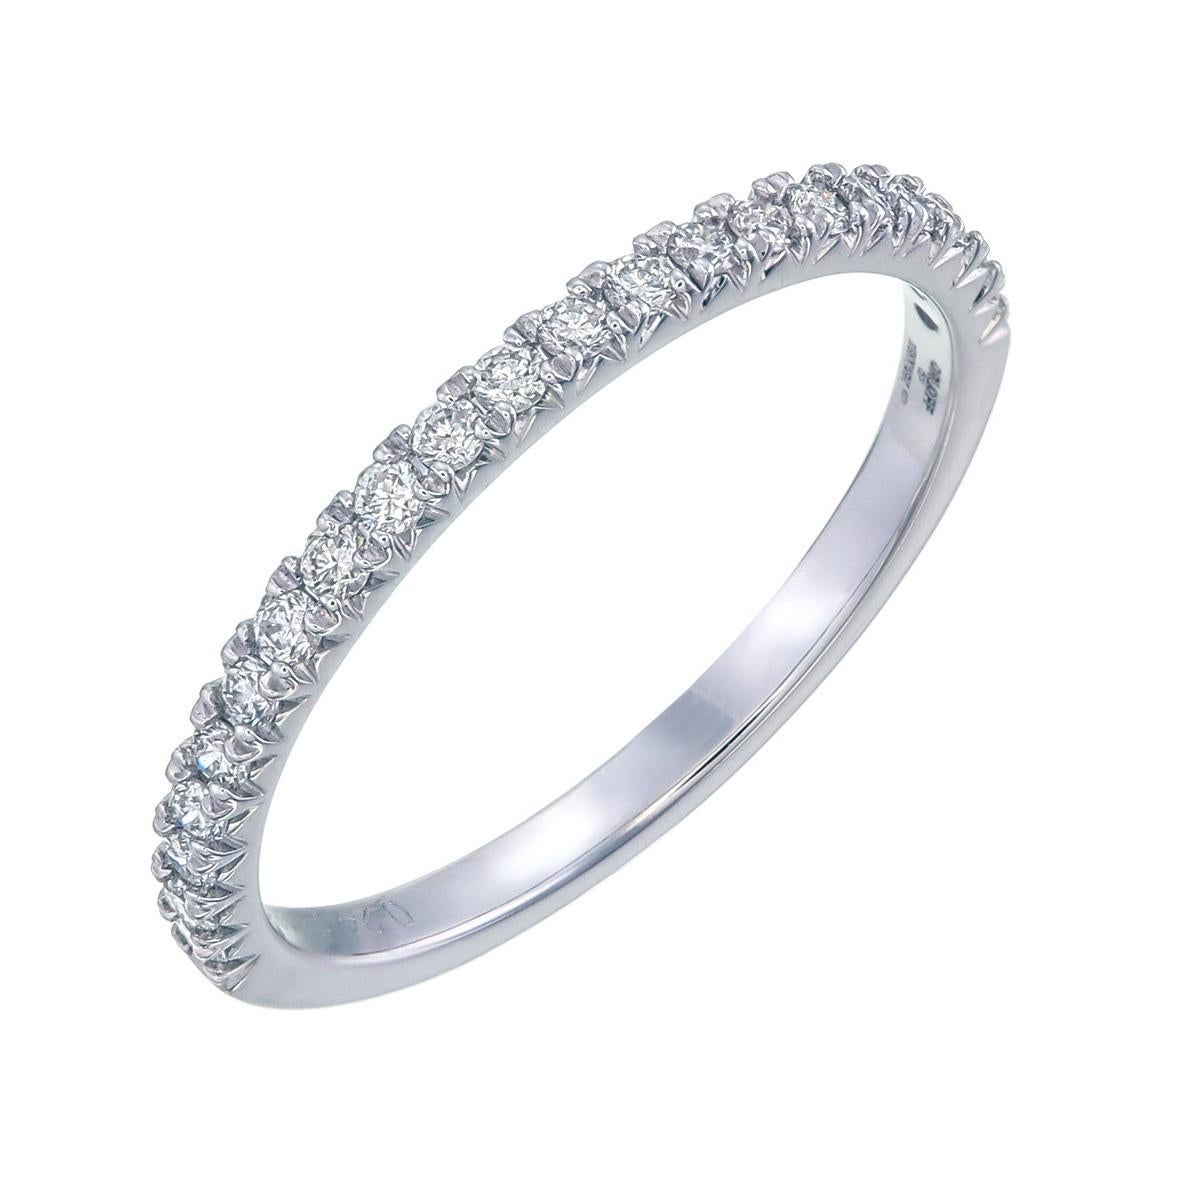 Orloff of Denmark;
The purity of 18 Karat white gold and the sparkle of 21 precision-cut diamonds unite in this sophisticated ring. Each SIW, F color diamond is a testament to clarity and craftsmanship, arranged seamlessly to create a band of light